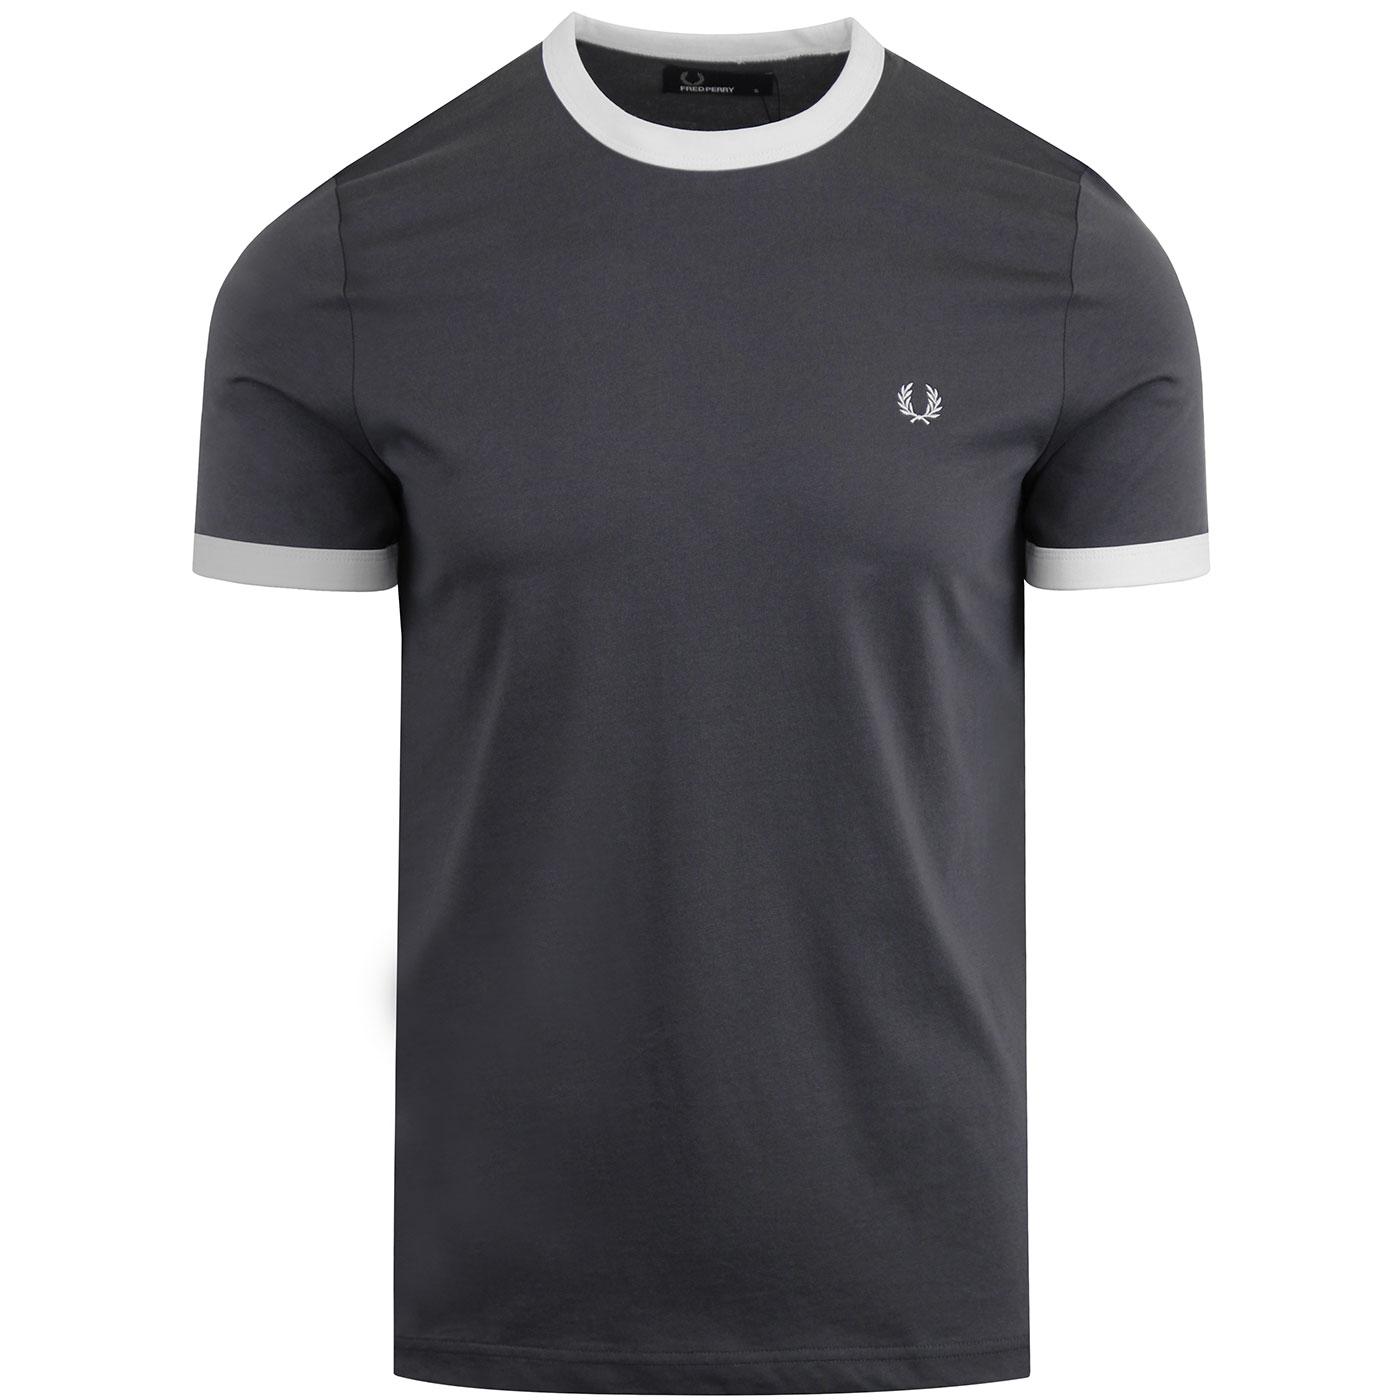 FRED PERRY Men's Retro Indie Ringer T-Shirt in Charcoal